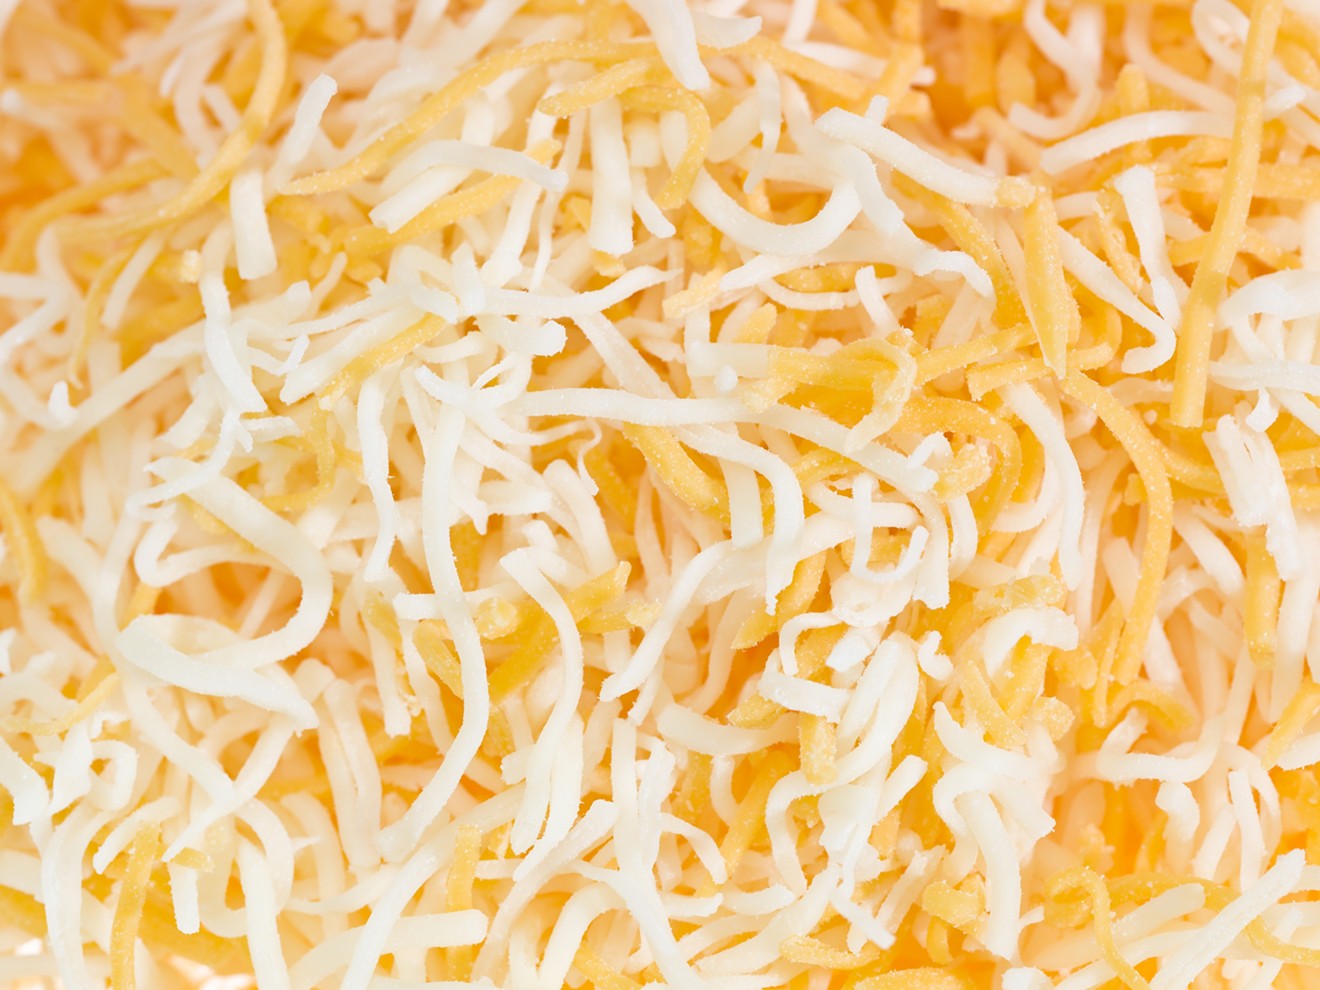 An Allen woman nearly died this weekend when she had to wait 18 minutes for shredded cheese.